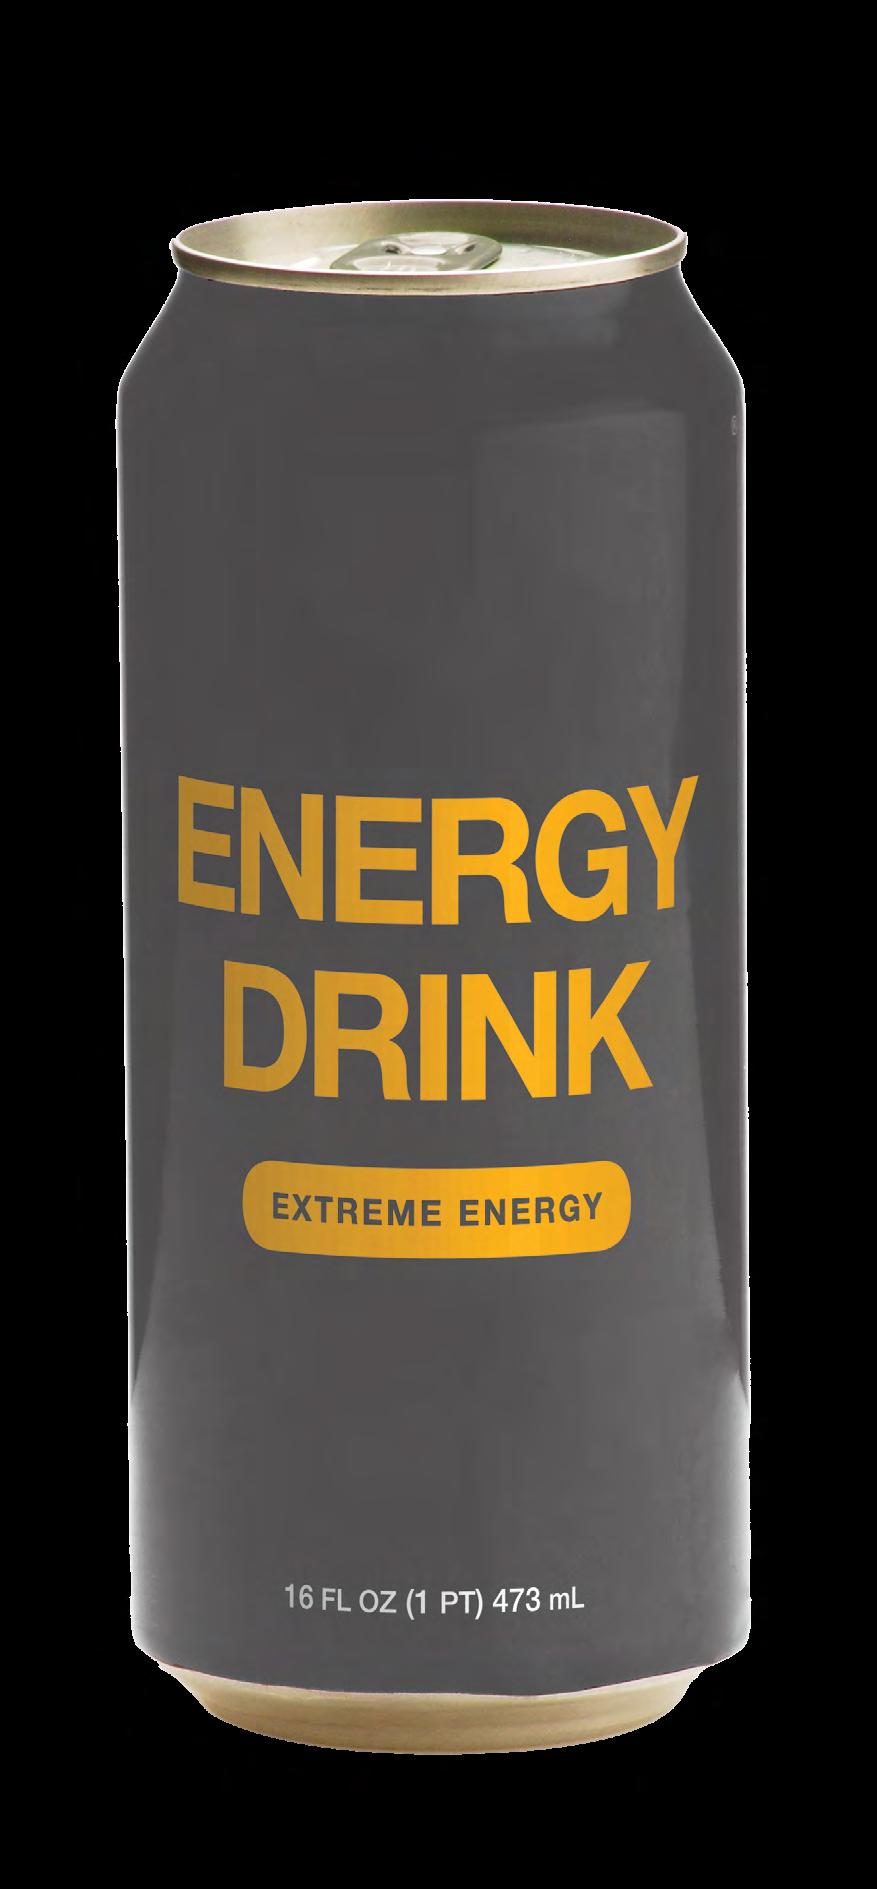 Energy Drink Servings Per Container 2 Calories 120 Calories from Fat 0 Sodium 70mg 3% Total Carbohydrate 30g 10% Sugars 30g Riboflavin 100% Niacin 100% Vitamin B6 100% Vitamin B12 100% vitamin A,